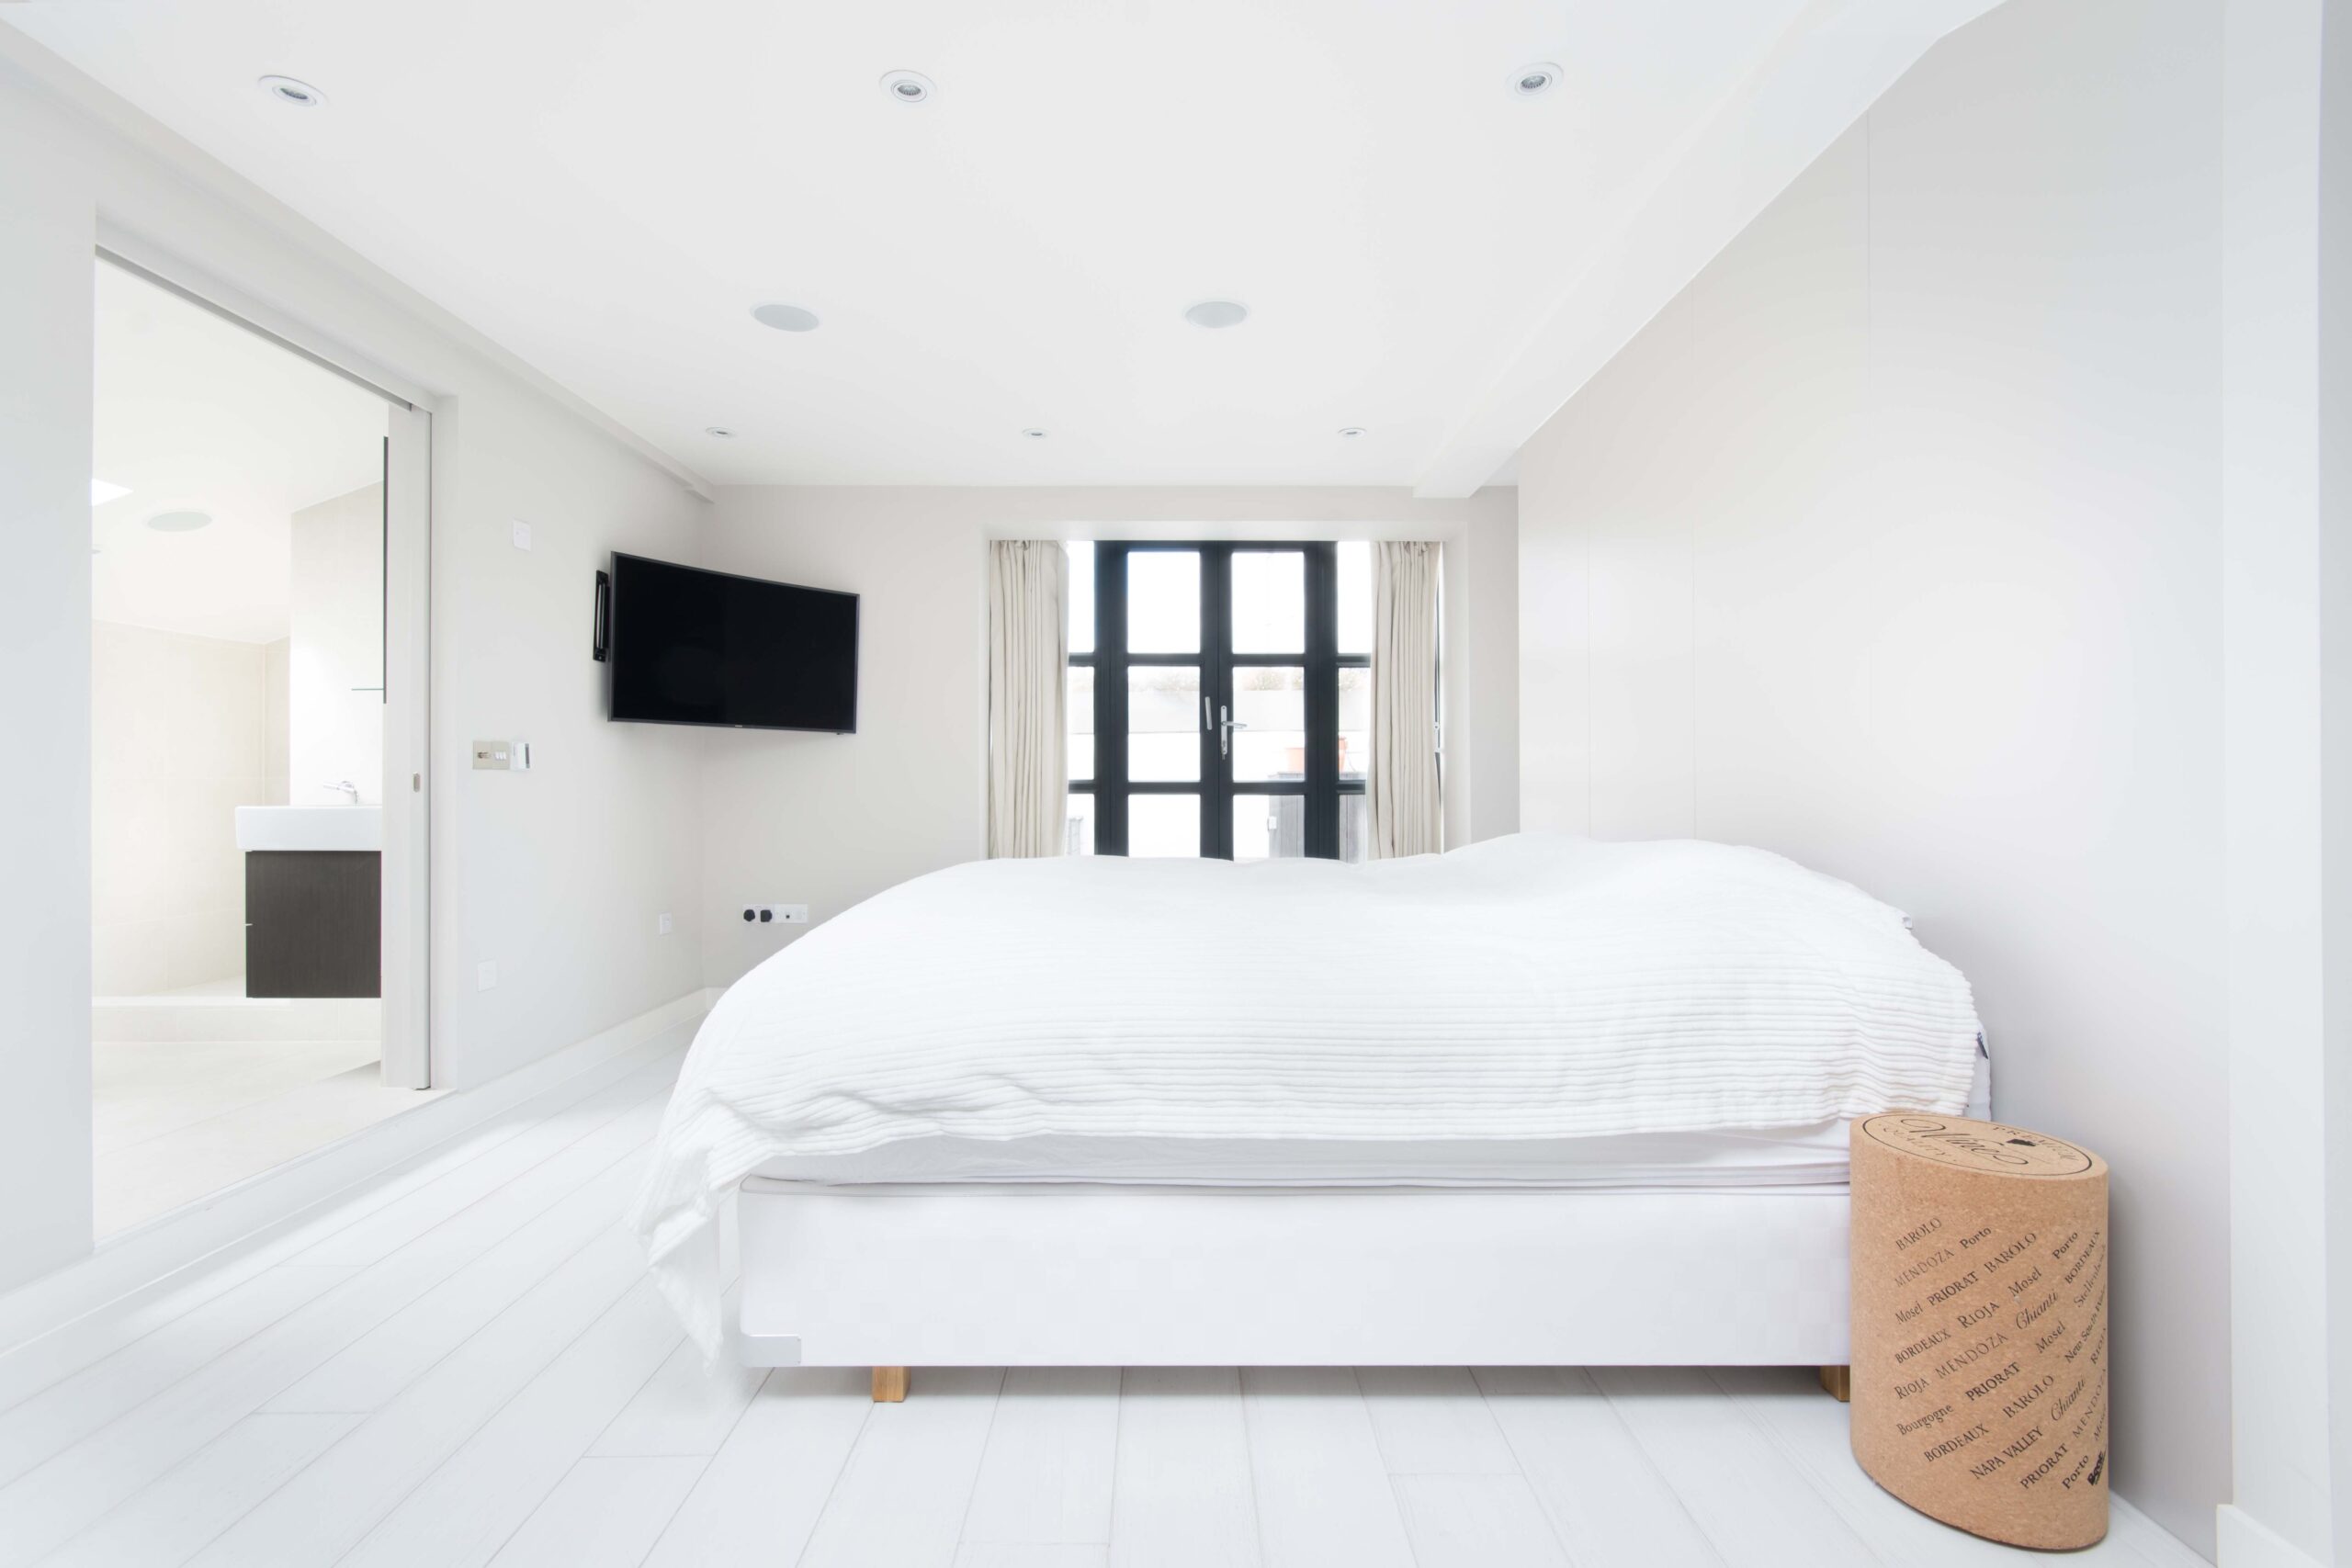 Bedroom at St Lukes Mews Notting Hill